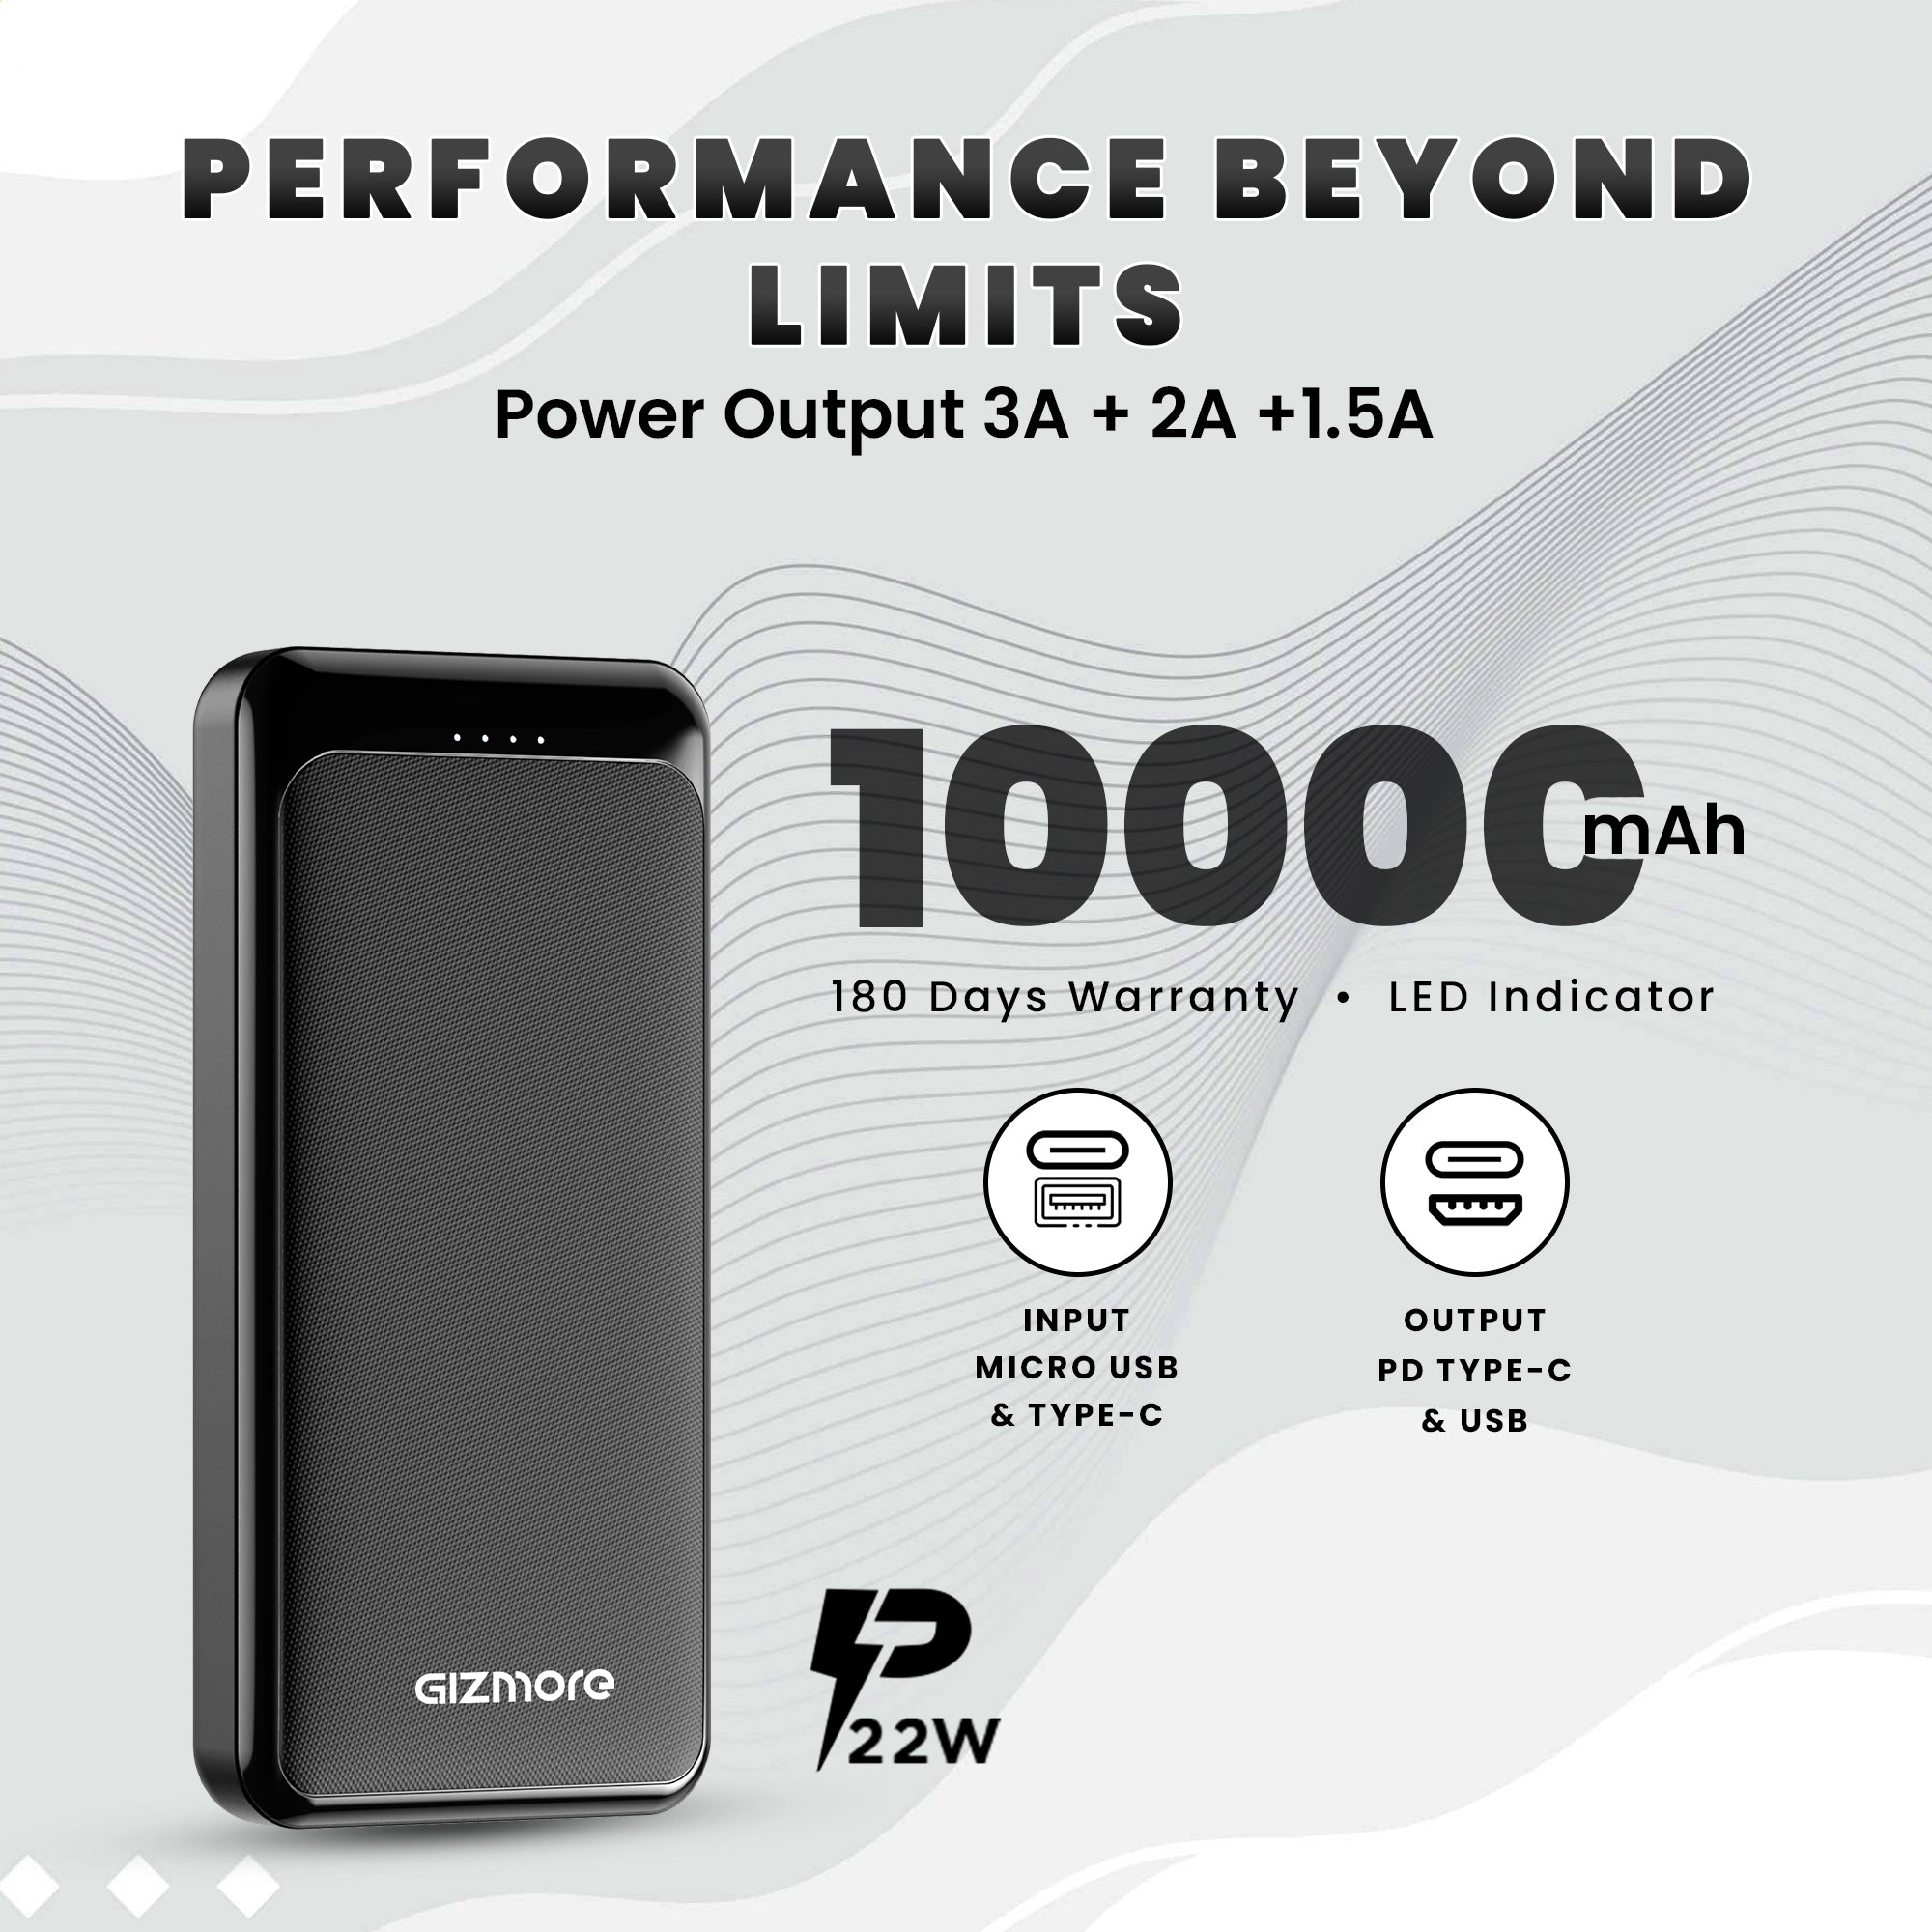 GIZMORE PD10KP4 10000mAh PD Power Bank 22W Fast Charging | Dual USB Output , 1 Micro USB Input, Type C (Input & Output)|LED Indicator, Lightweight| Lithium Polymer Power Bank (Black)